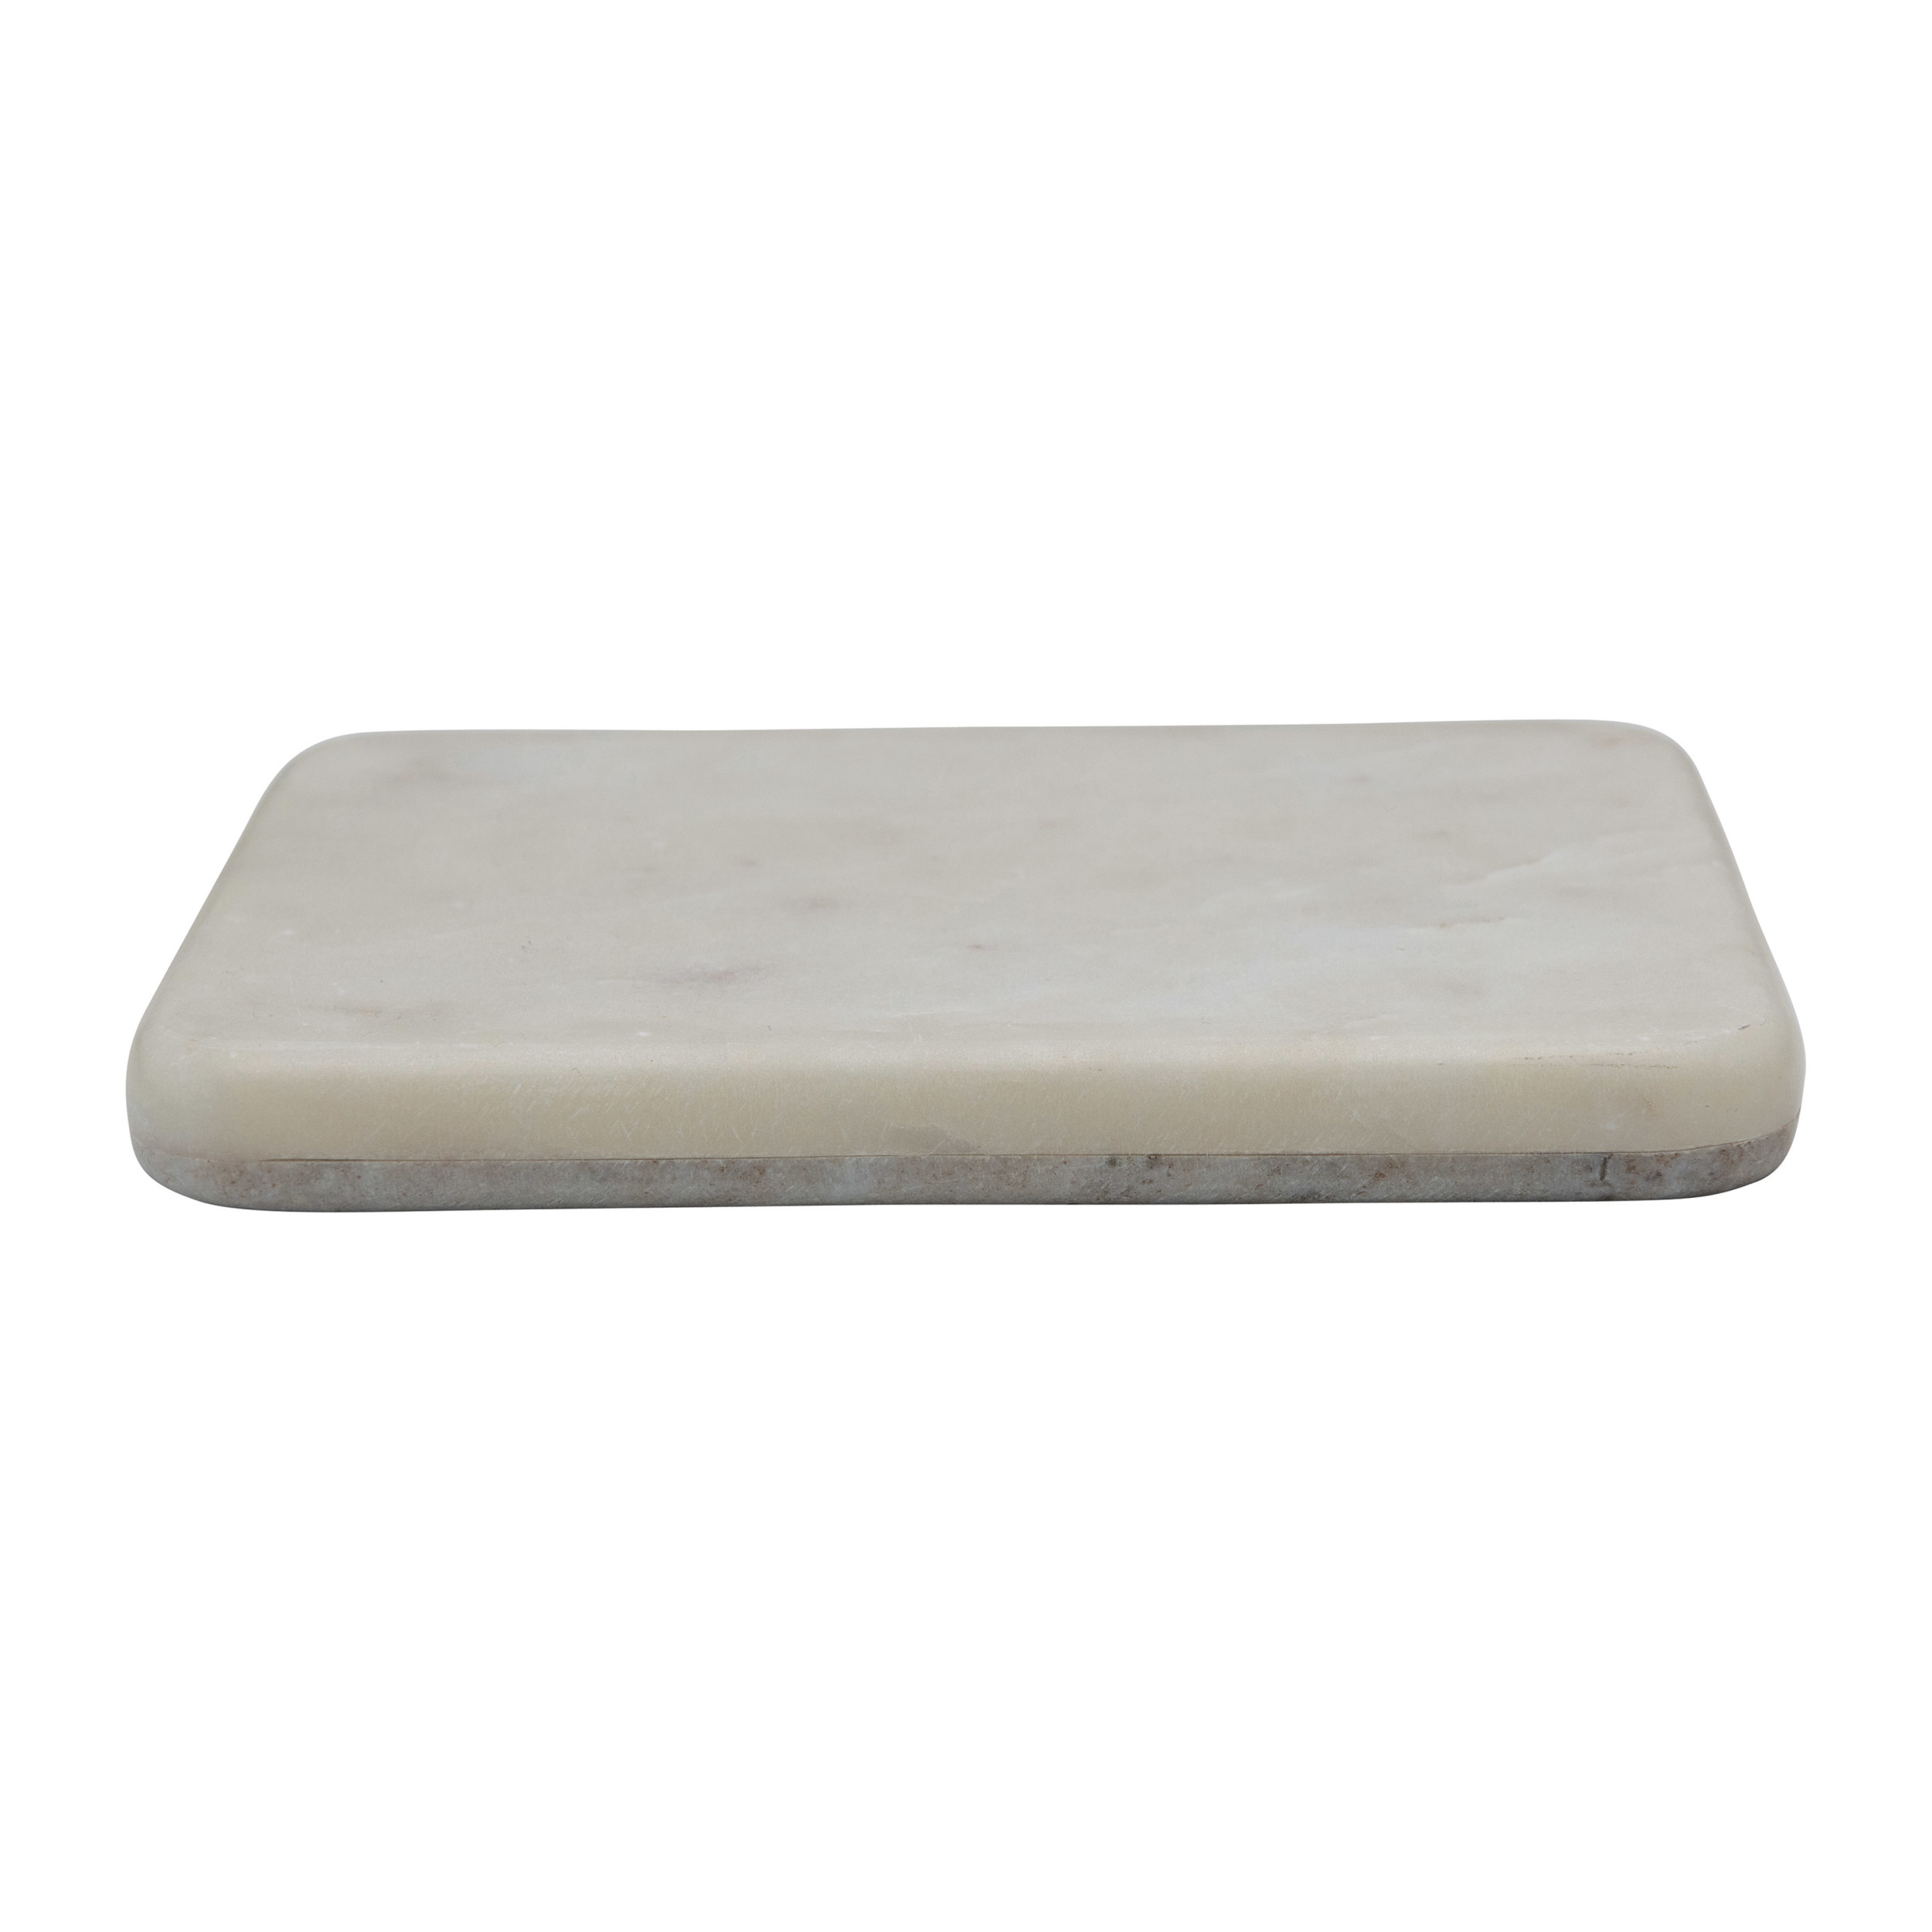 Creative Co-op Small White Marble Cheese/Cutting Board,